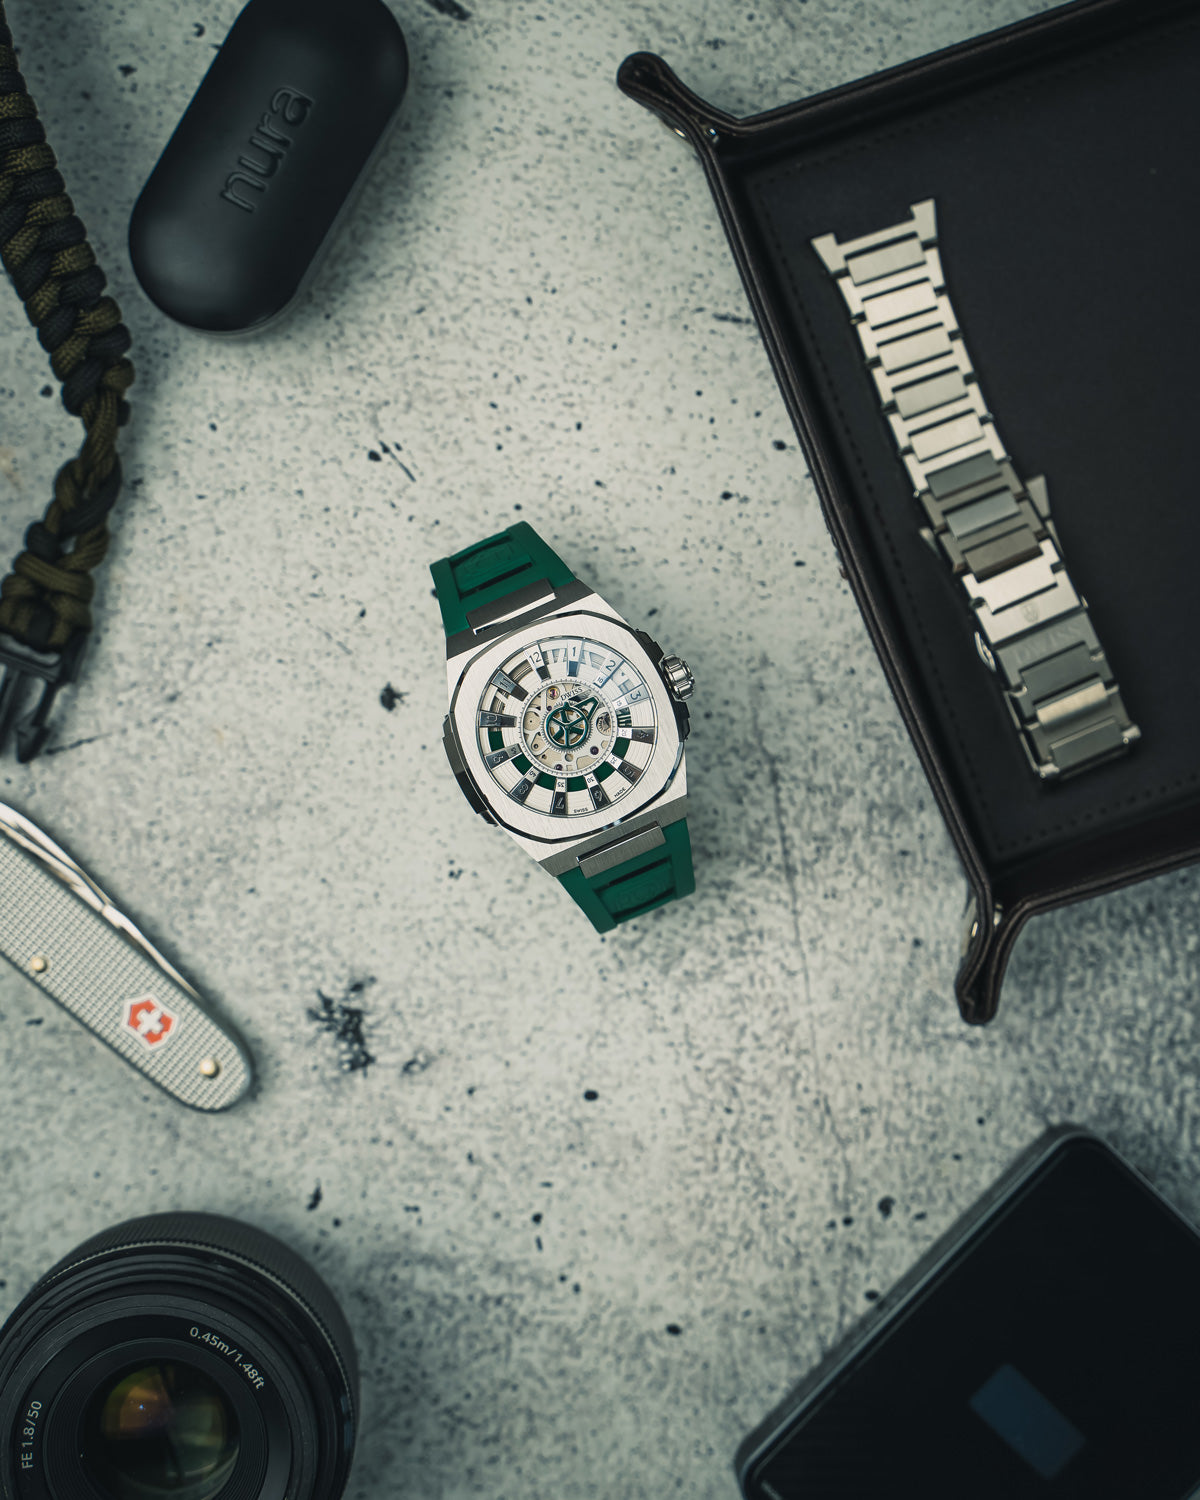 DWISS M3S green - FKM white rubber strap, swiss made design awarded watch with DWISS signature mysterious hours time display and sapphire crystal